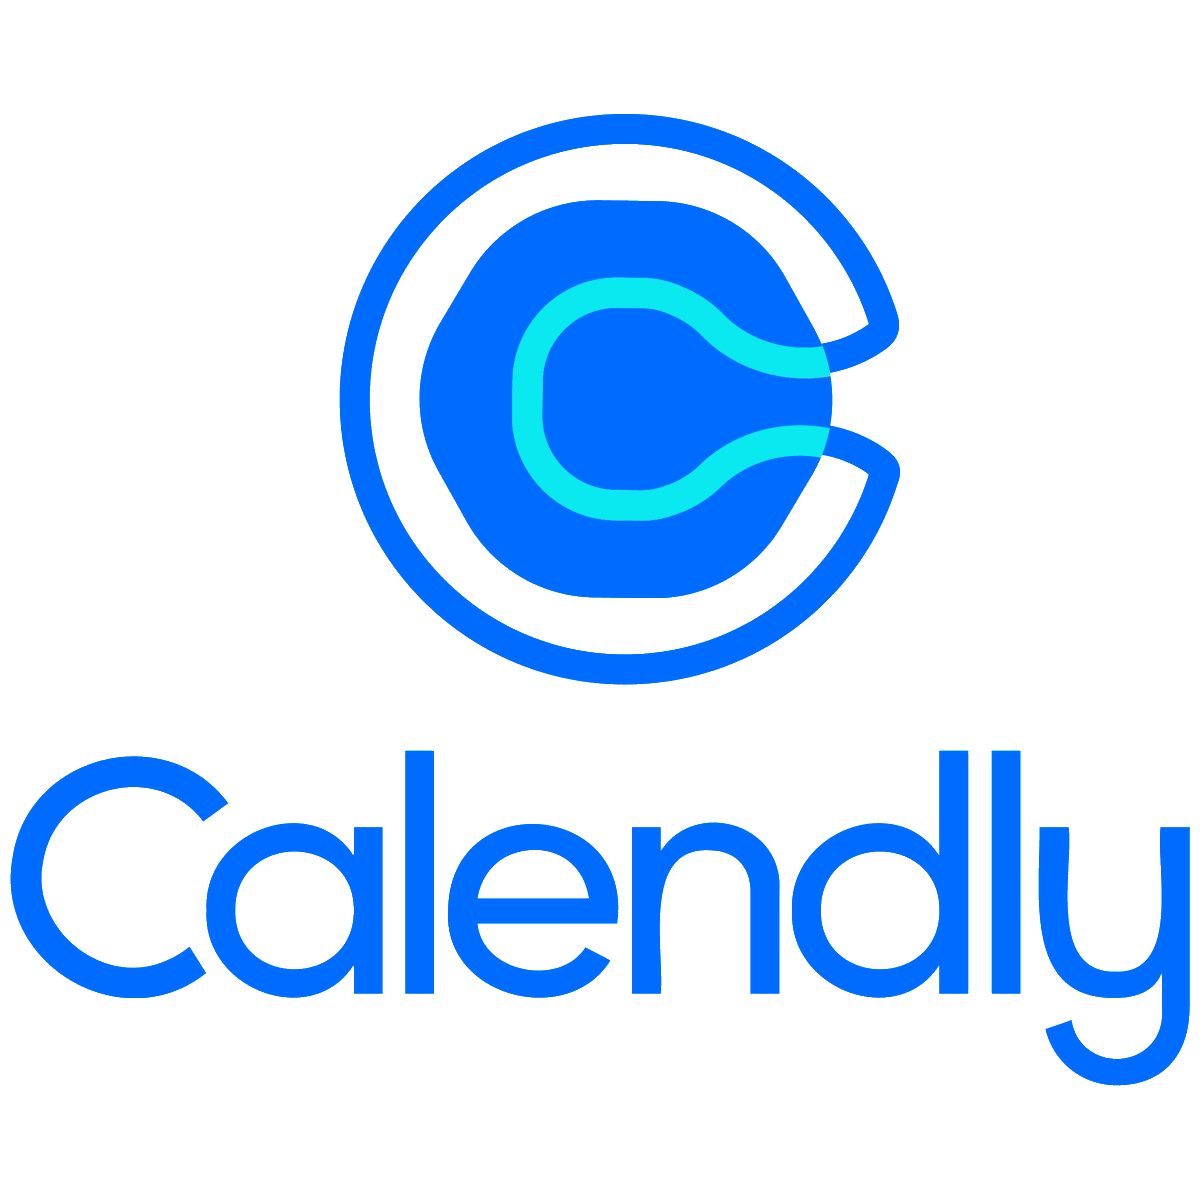 Streamline scheduling with Calendly. Set availability, share links & save time. Improve customer experience & integrate with tools. Learn more about scheduling software for your small business. #TechSeek #SmallBiz #ITSupport #Productivity #SchedulingSoftware